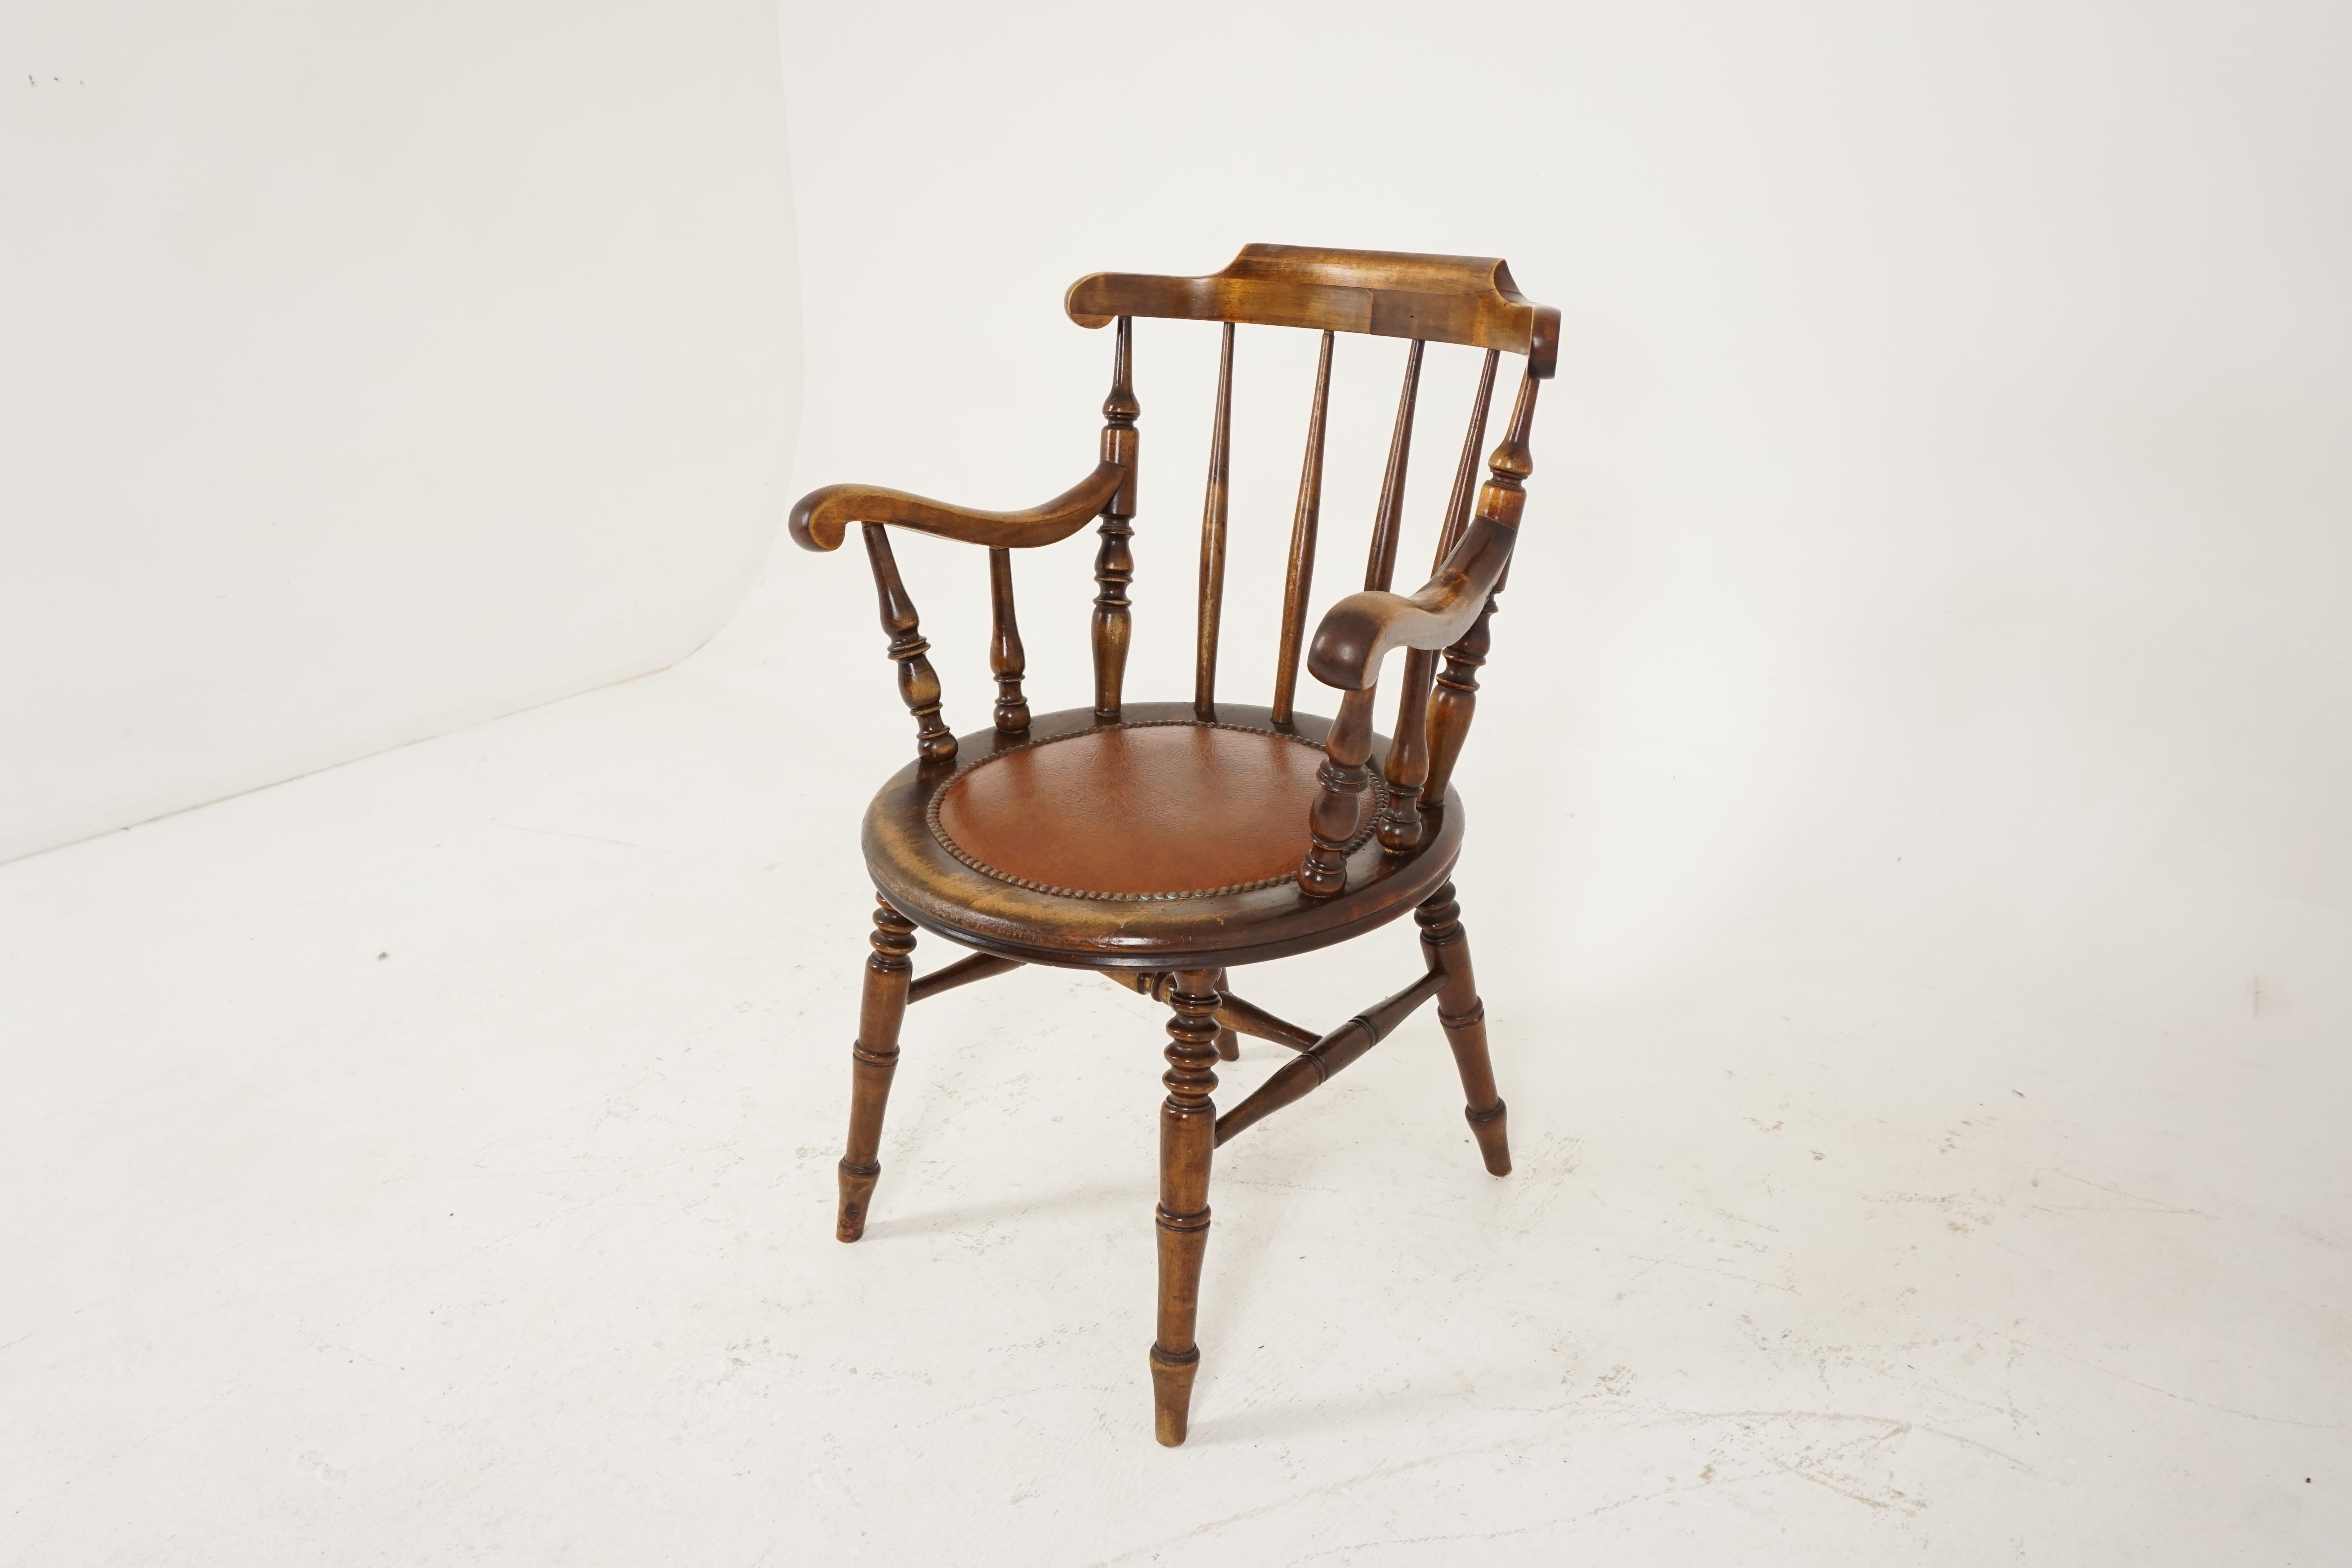 Antique Windsor style arm chair, open arm chair, Scotland 1830, B2461

Scotland 1830
Solid beechwood
Original finish
Shaped rail on top
Four turned spindles to the back
Large turned supports with shaped swept arms to the side
Circular